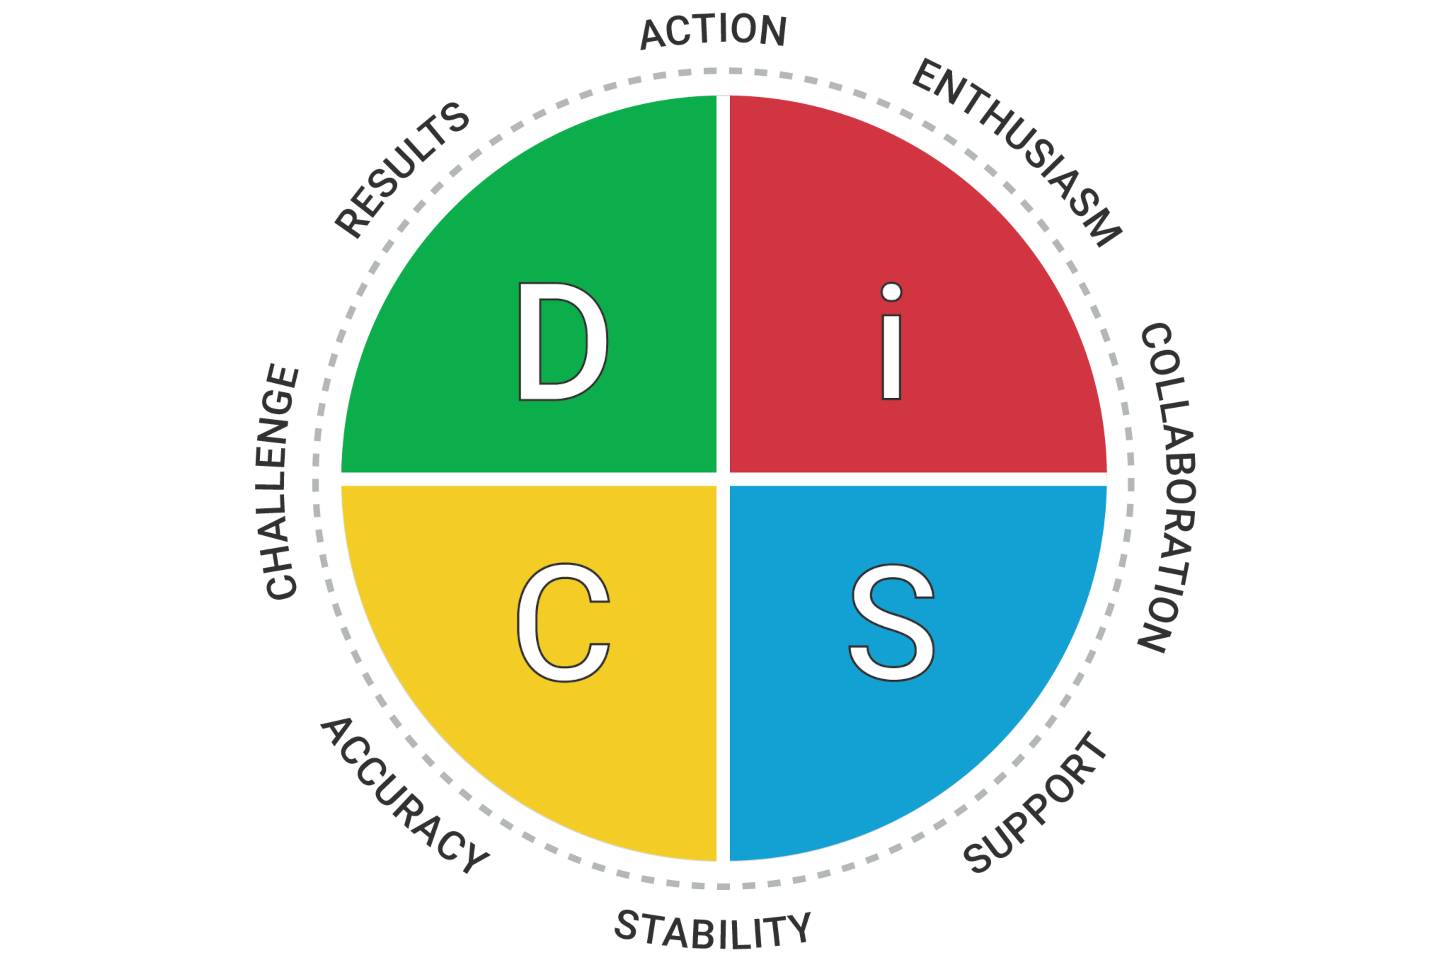 The D I S C personality type wheel